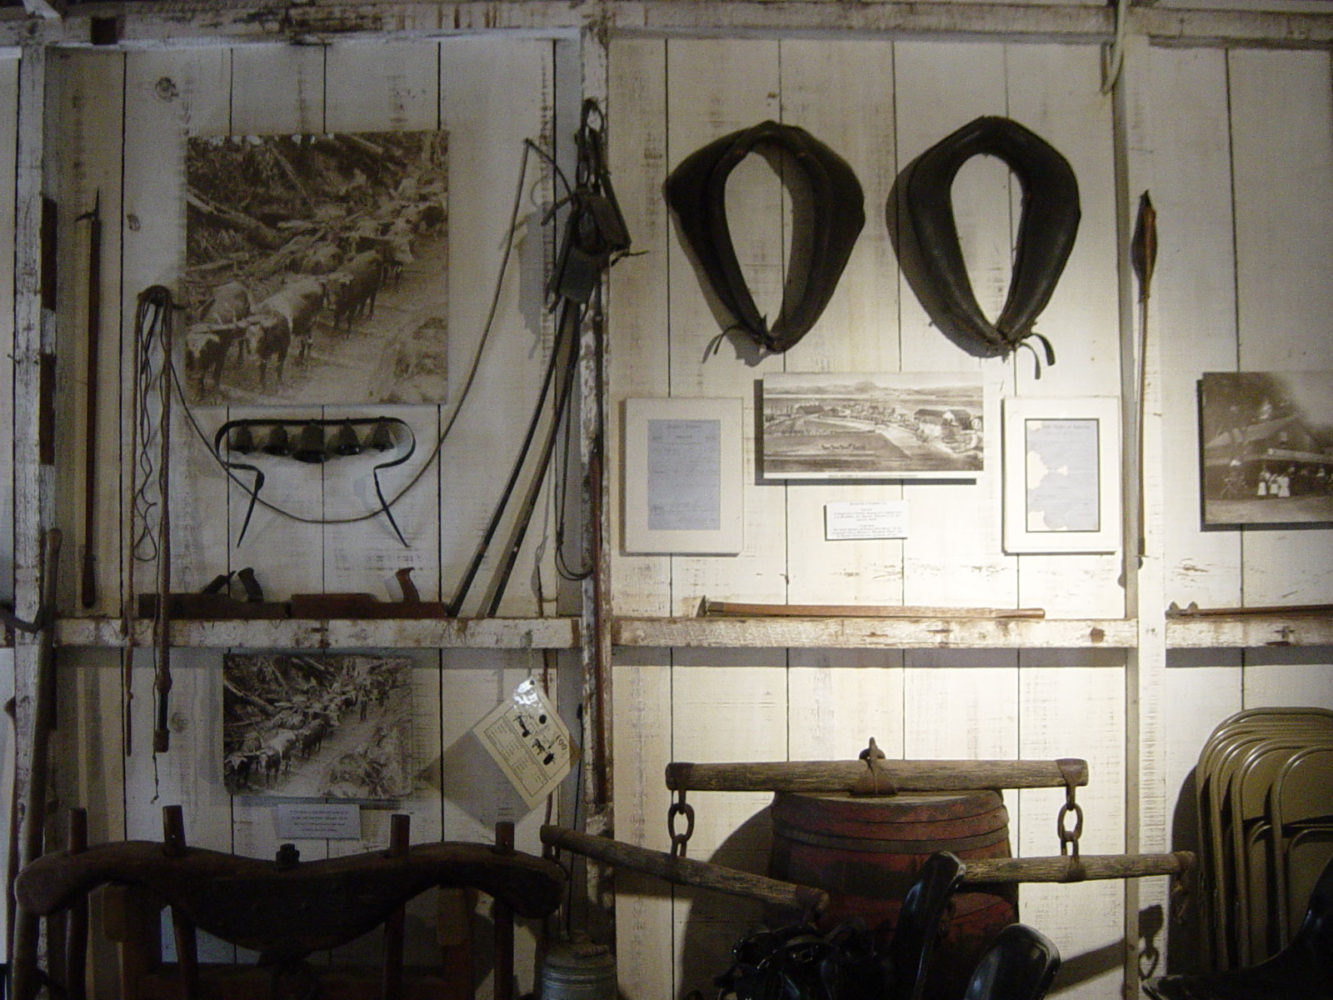 A display of antique tack and plows at the Woodside Store